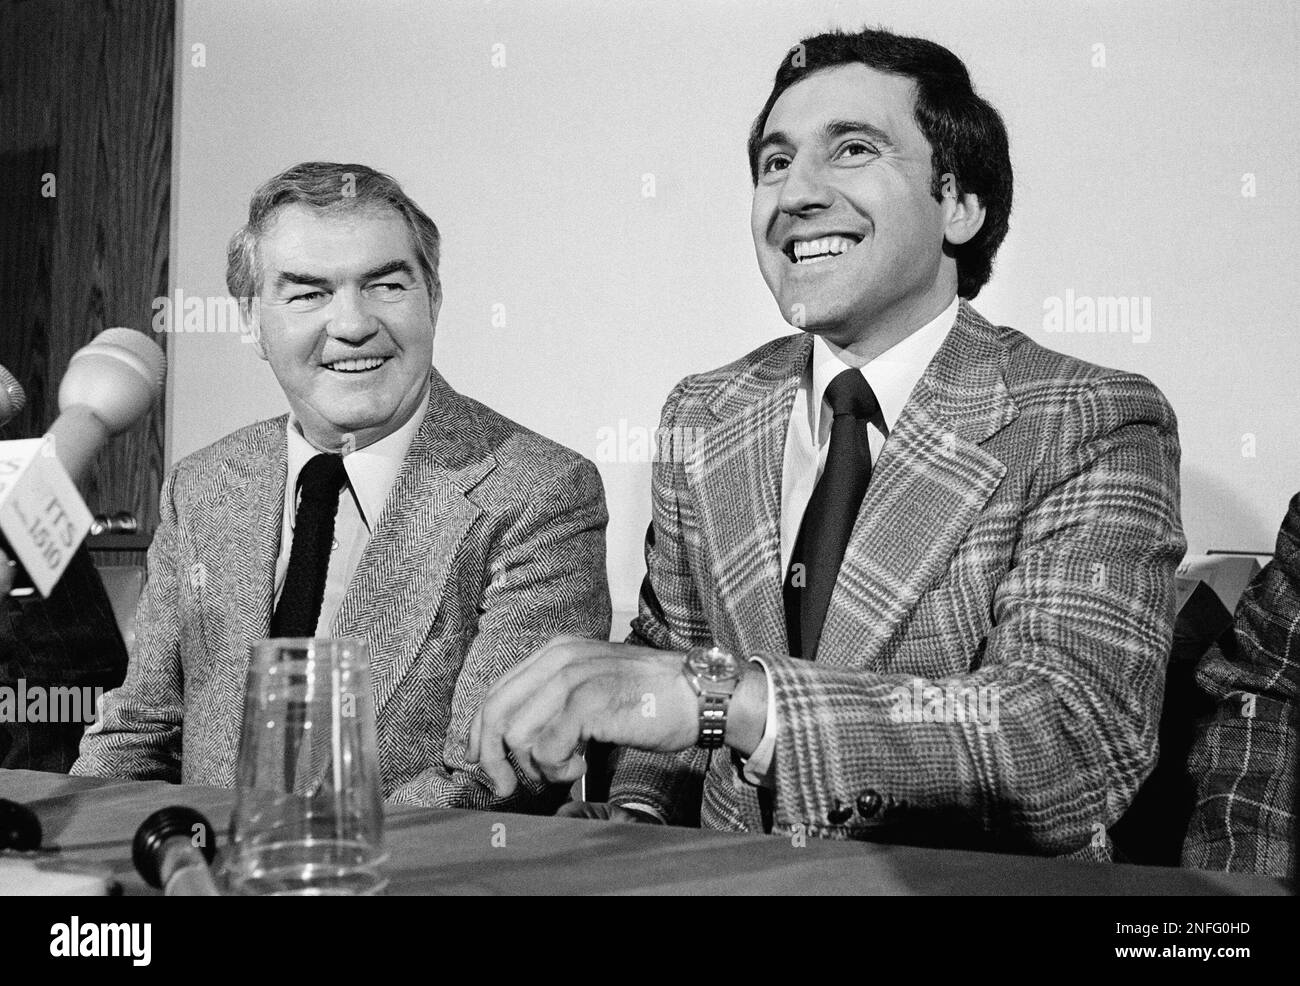 Veteran sportscaster Ken Coleman, left, and former Boston Red Sox slugger Rico Petrocelli at a Boston news conference, Wednesday, Nov